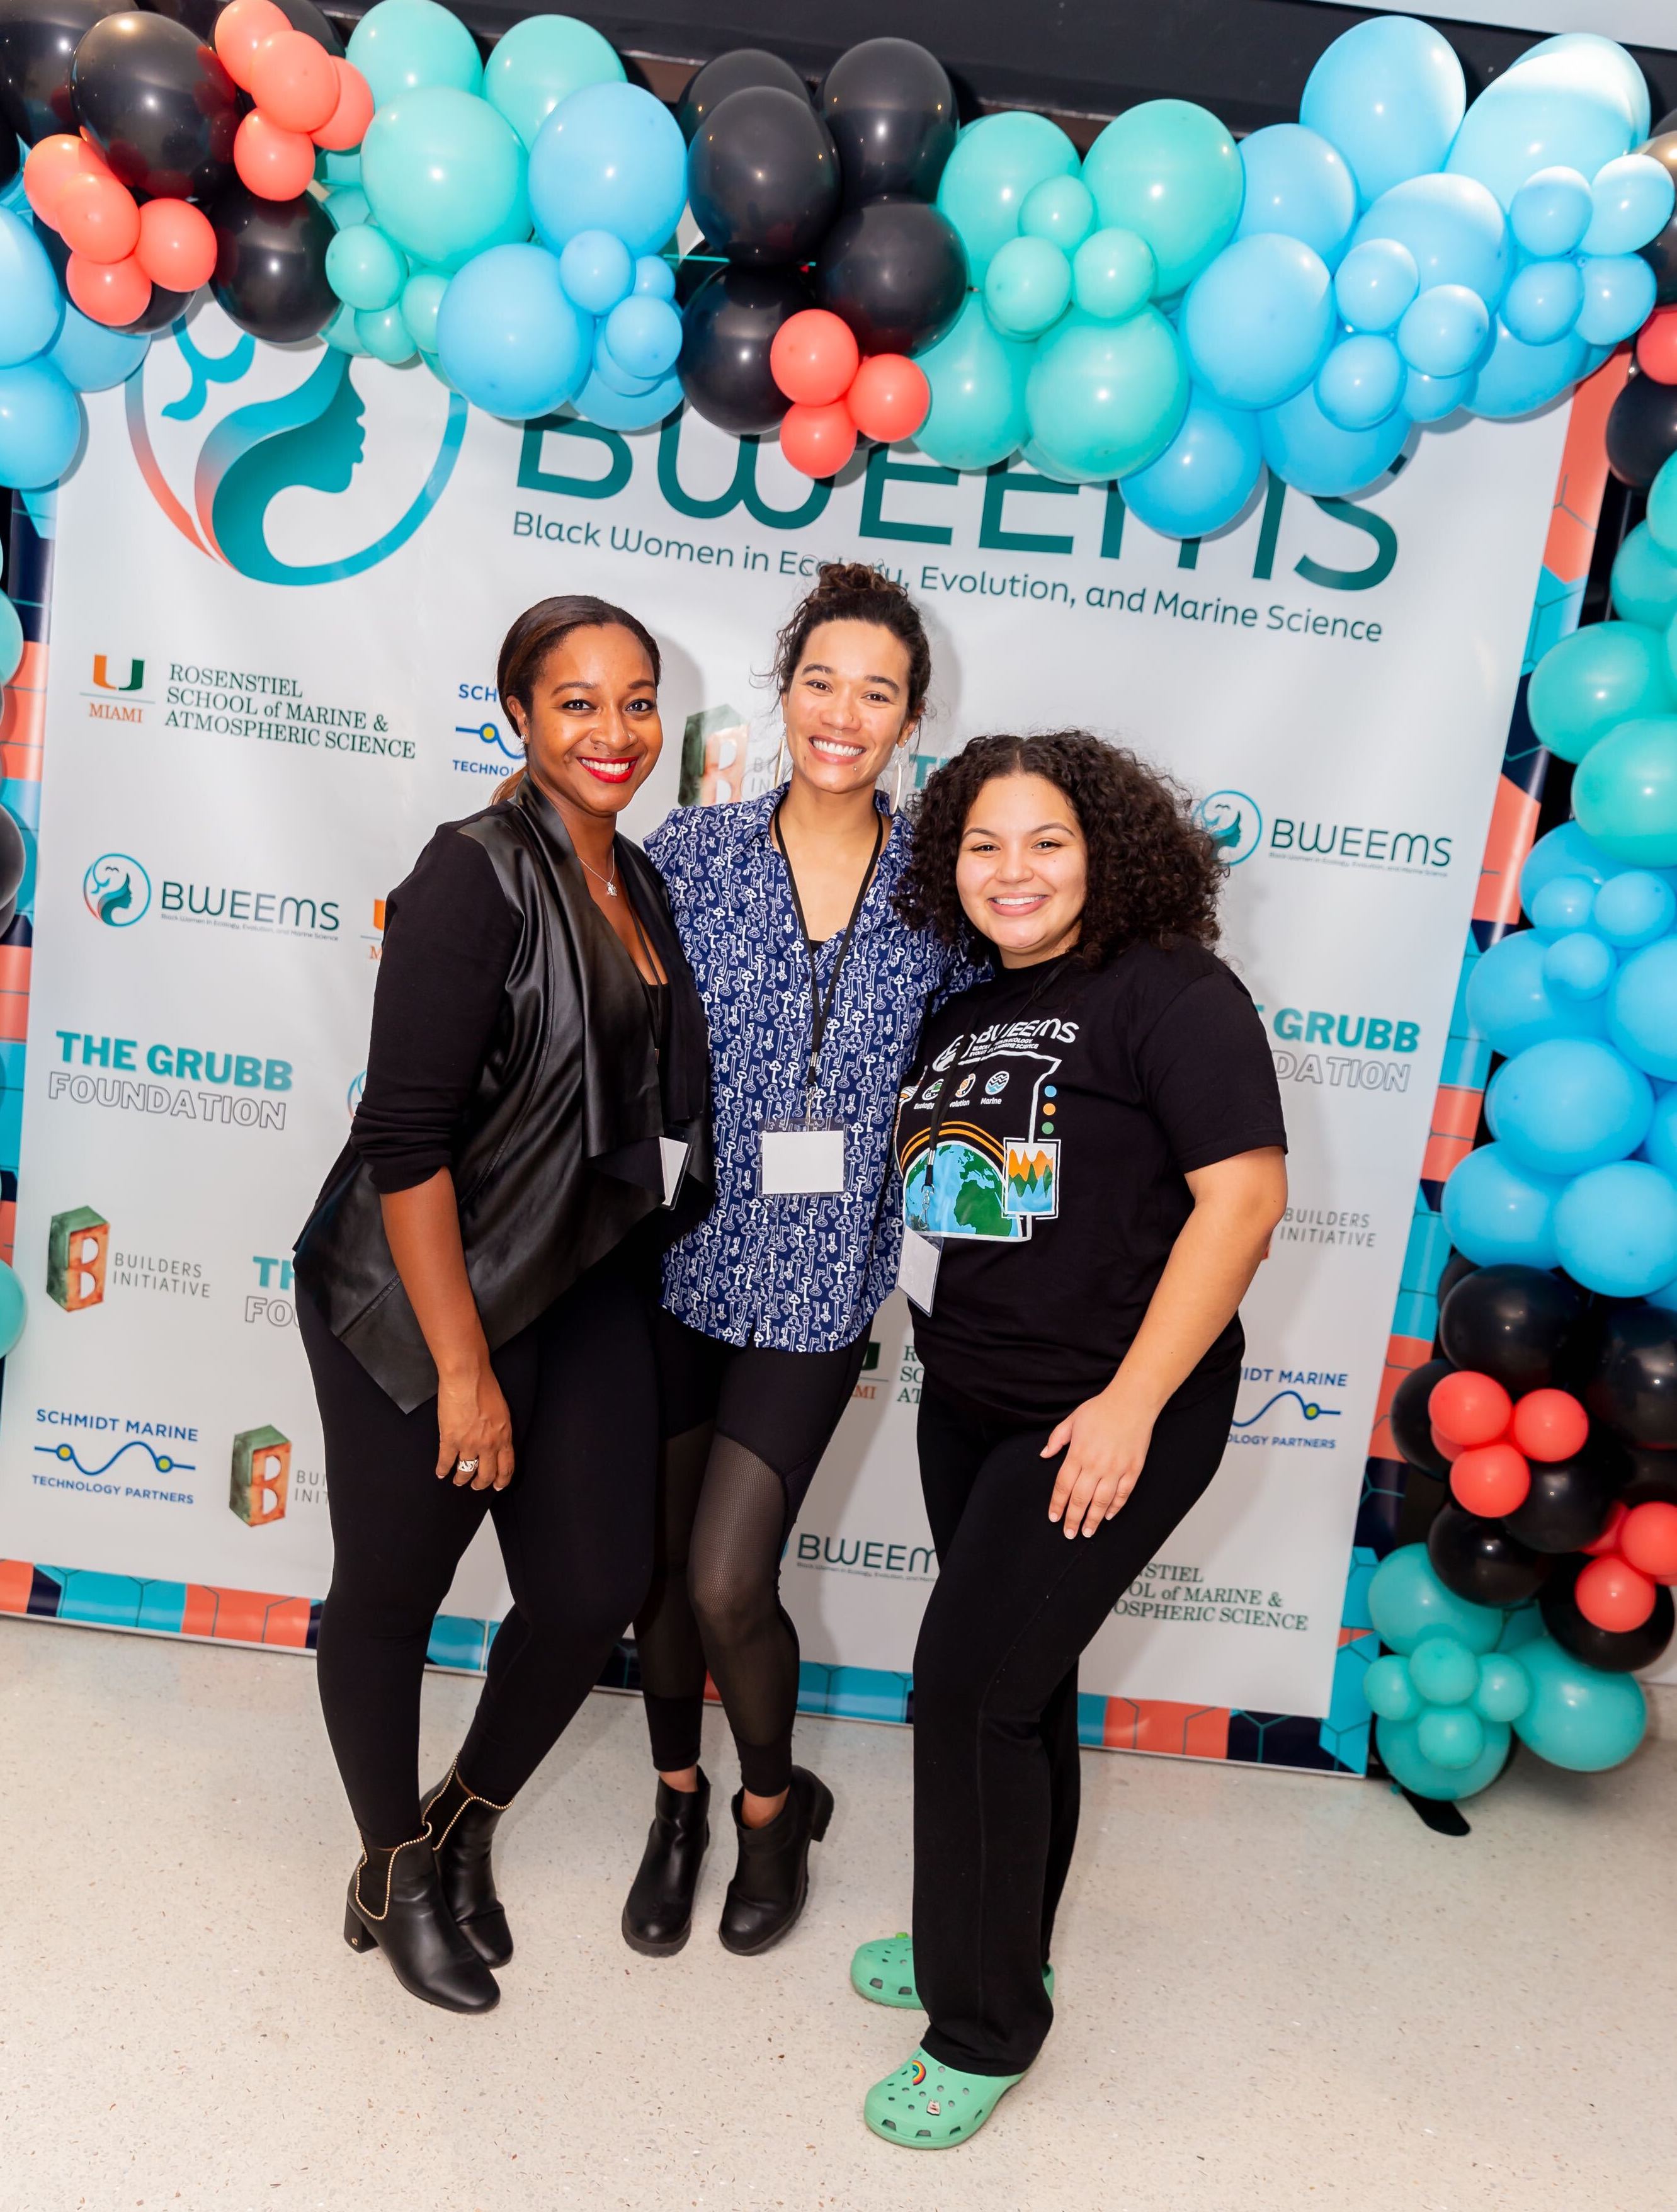 3 smiling Black women standing in front of a BWEEMS-branded backdrop with an arbor of black, blue, green, and red balloons